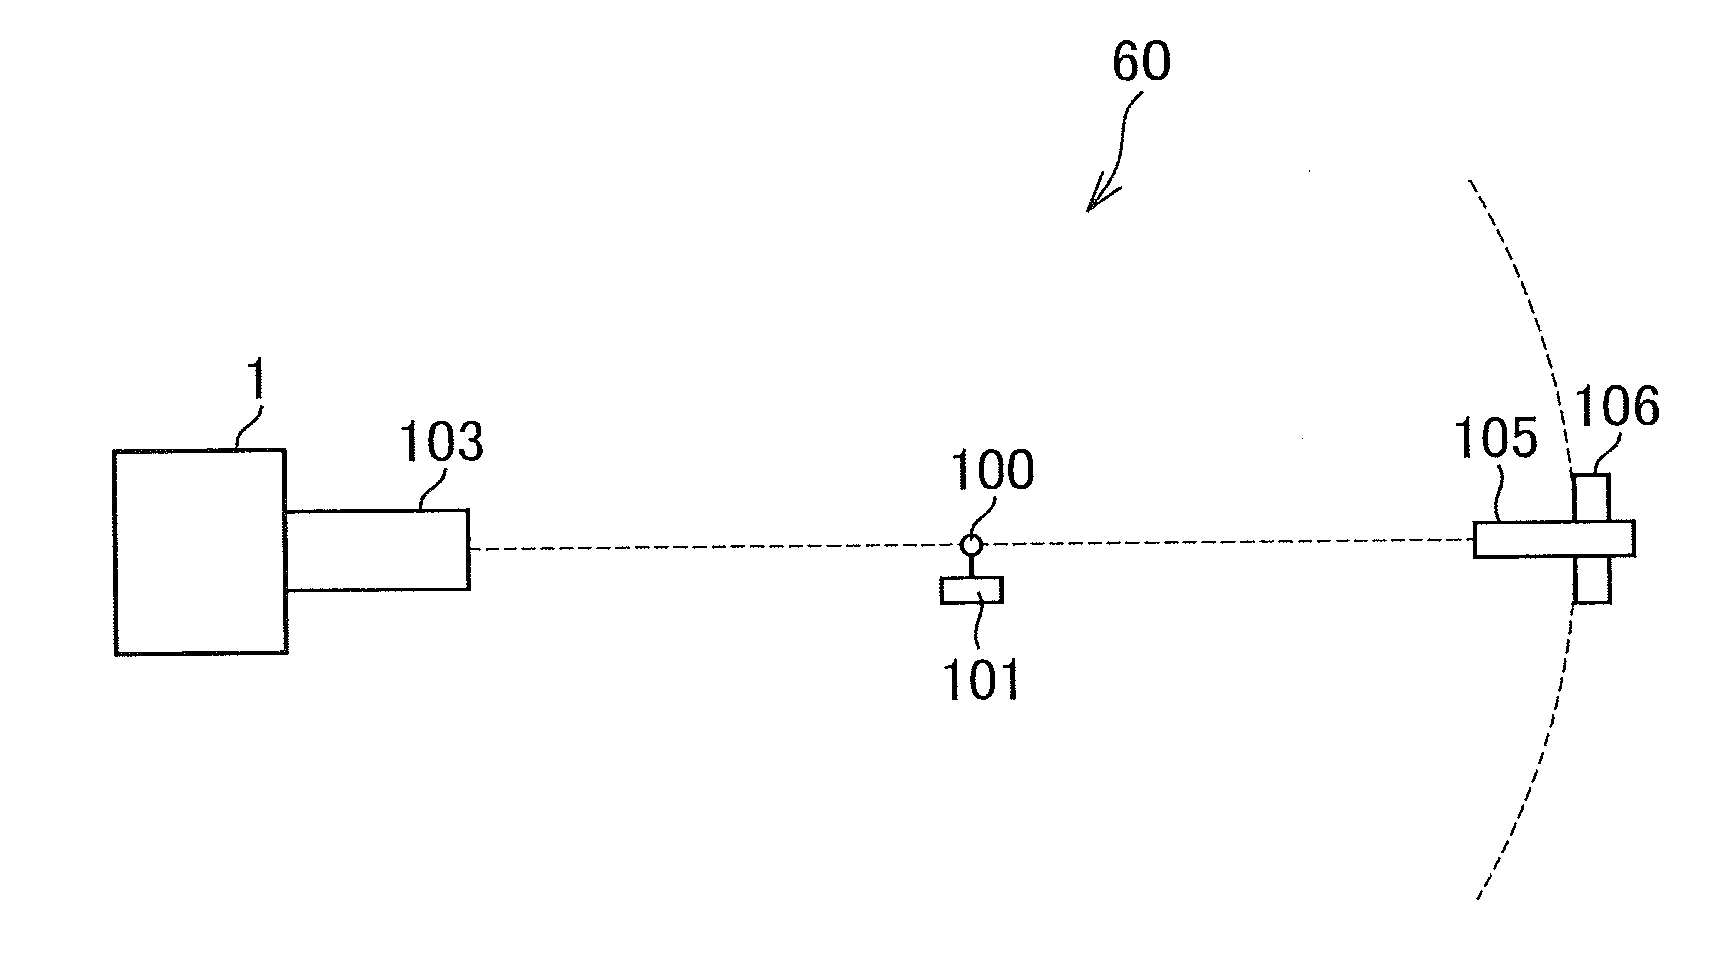 X-ray generator and adjustment method therefor